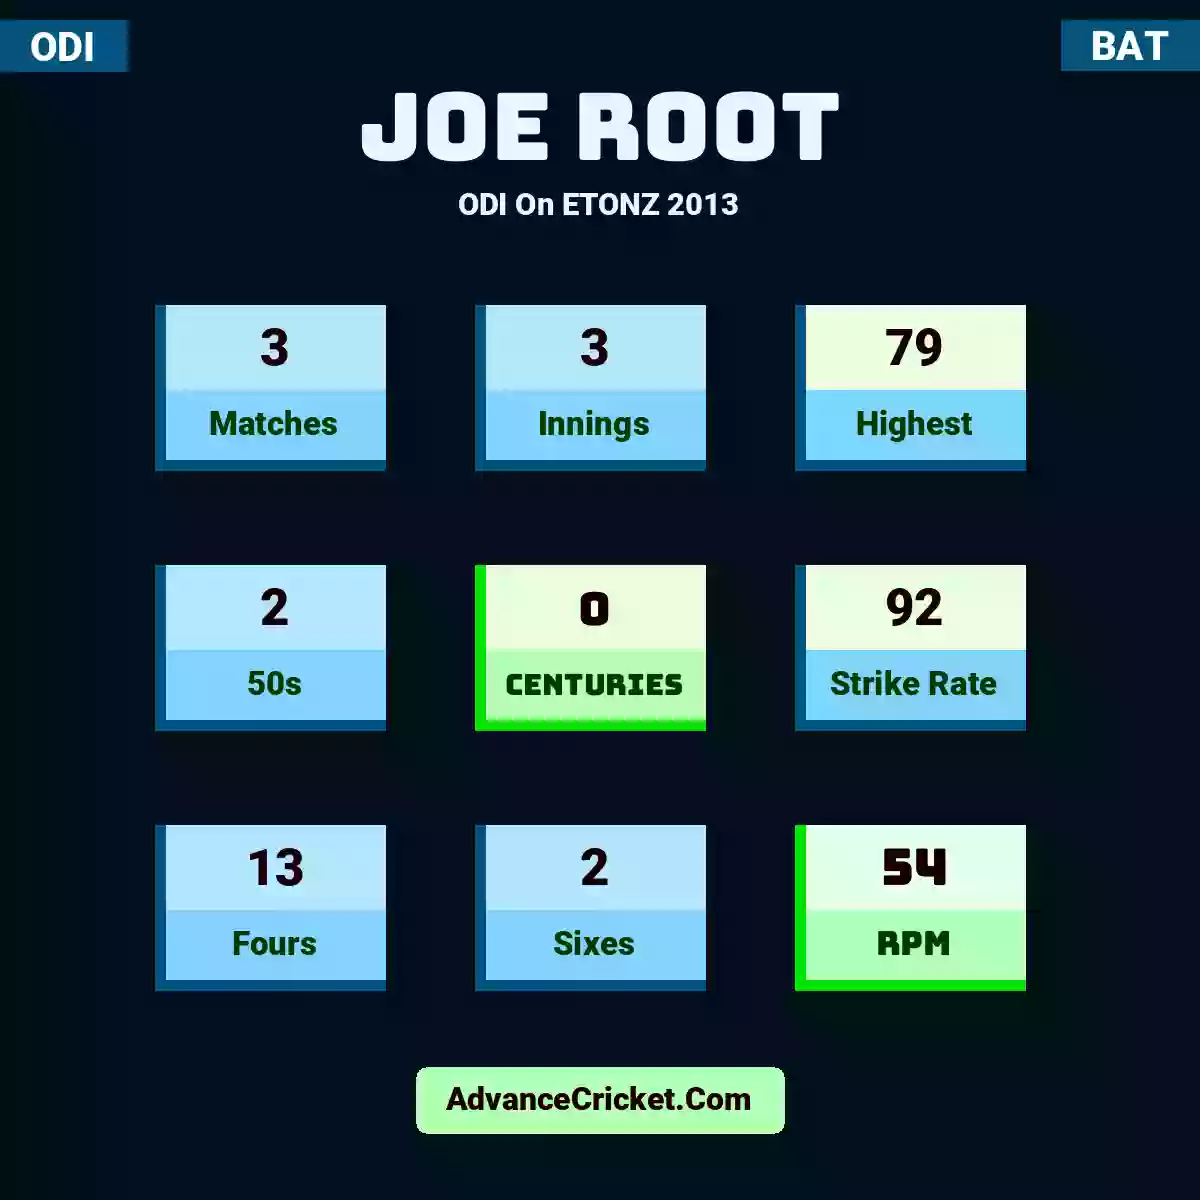 Joe Root ODI  On ETONZ 2013, Joe Root played 3 matches, scored 79 runs as highest, 2 half-centuries, and 0 centuries, with a strike rate of 92. J.Root hit 13 fours and 2 sixes, with an RPM of 54.